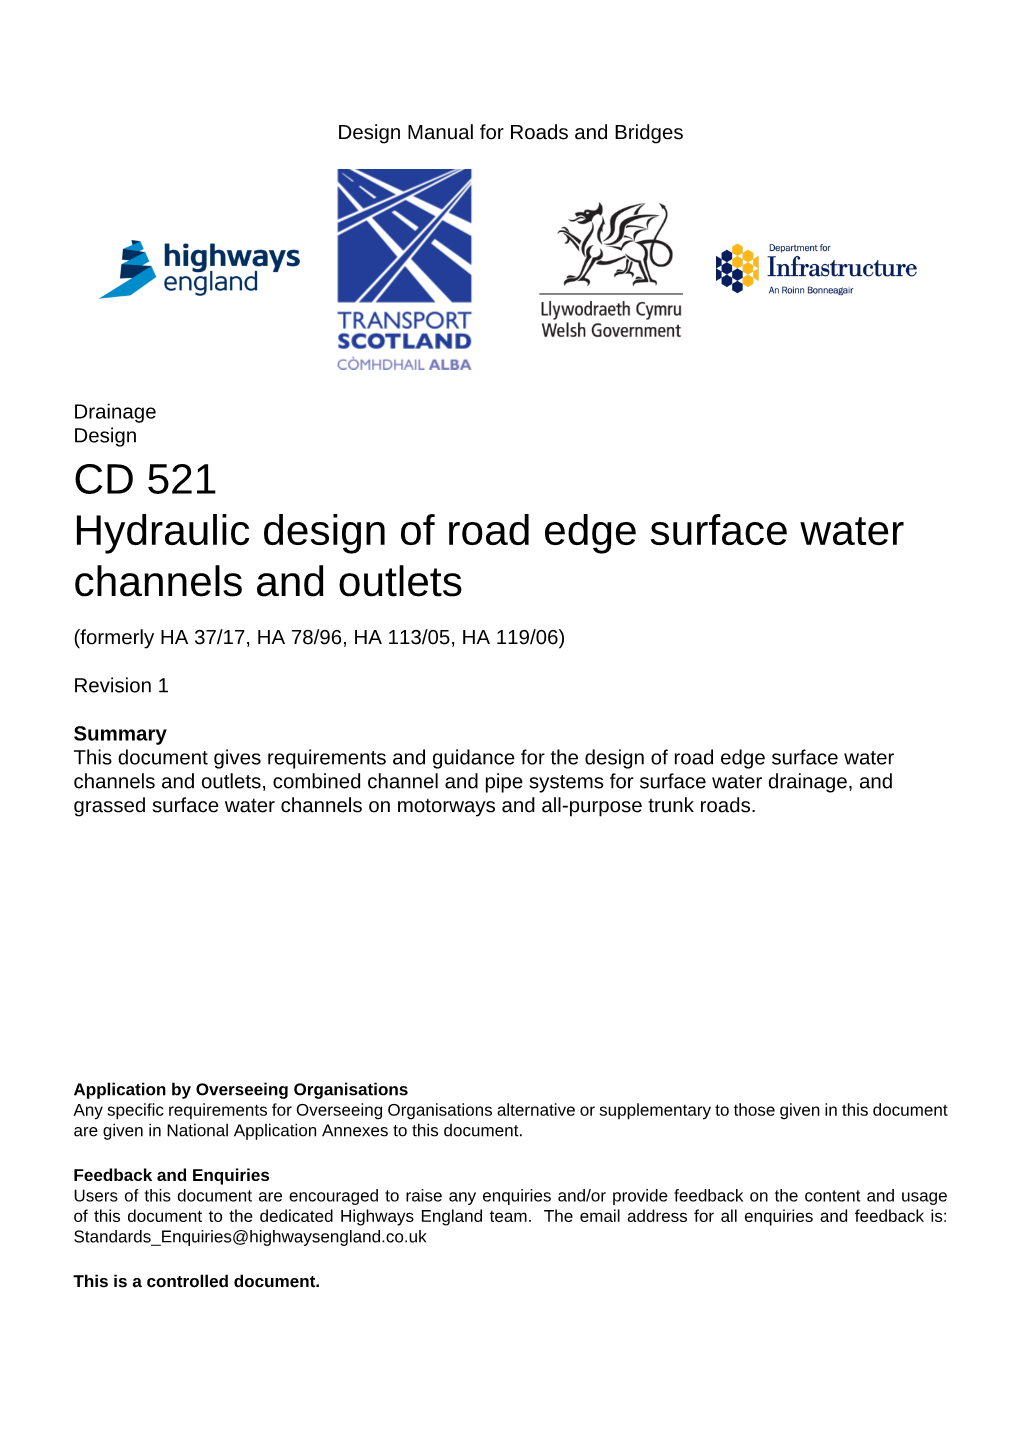 CD 521 Hydraulic Design of Road Edge Surface Water Channels and Outlets